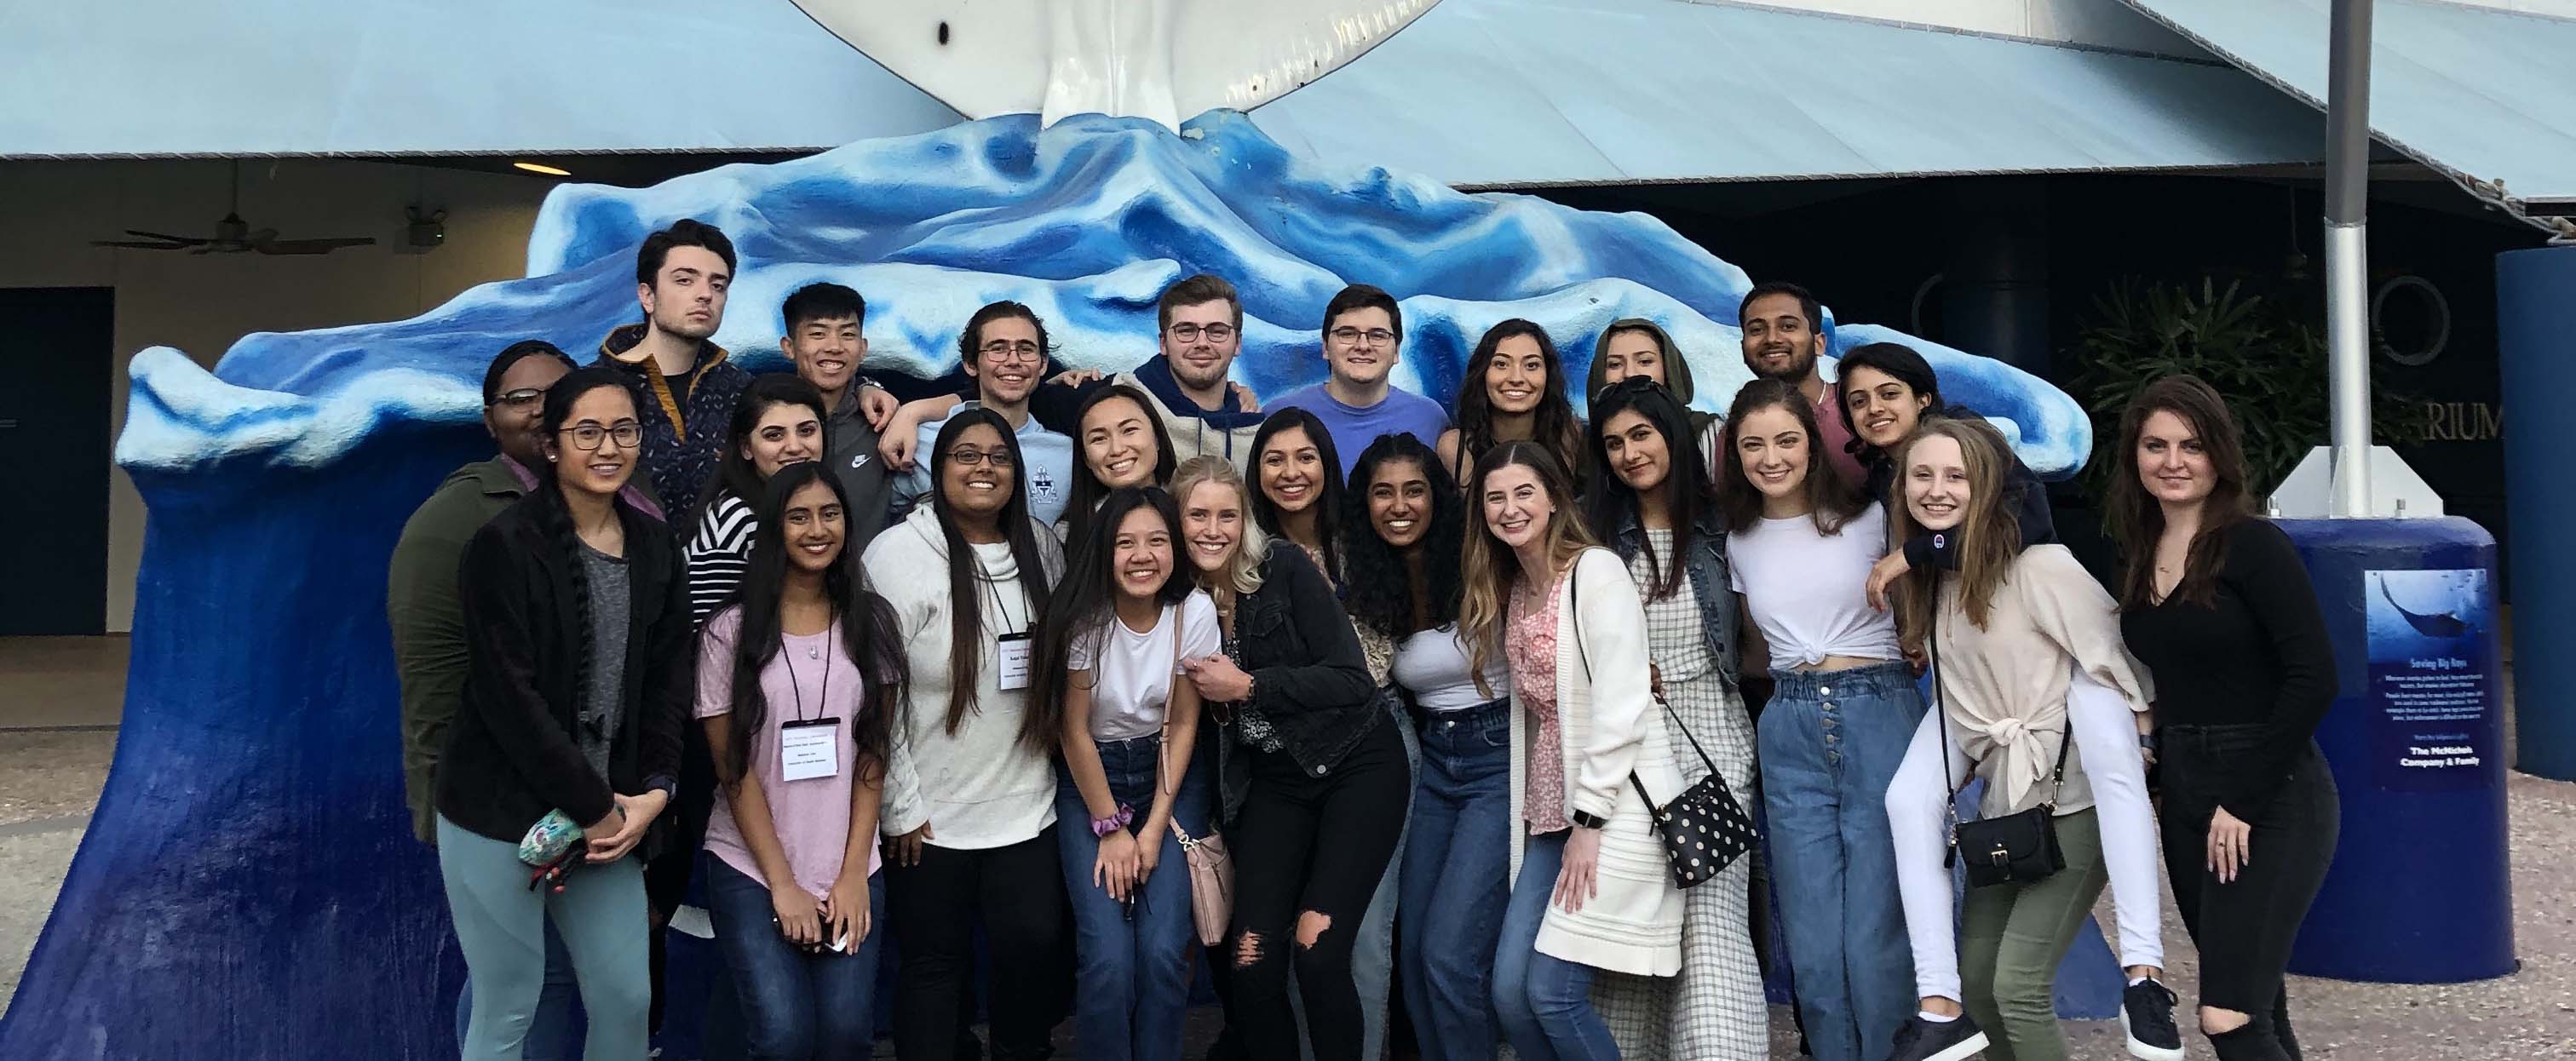 AED 2019-2020 members at the Tampa Aquarium during AED National Convention 2020